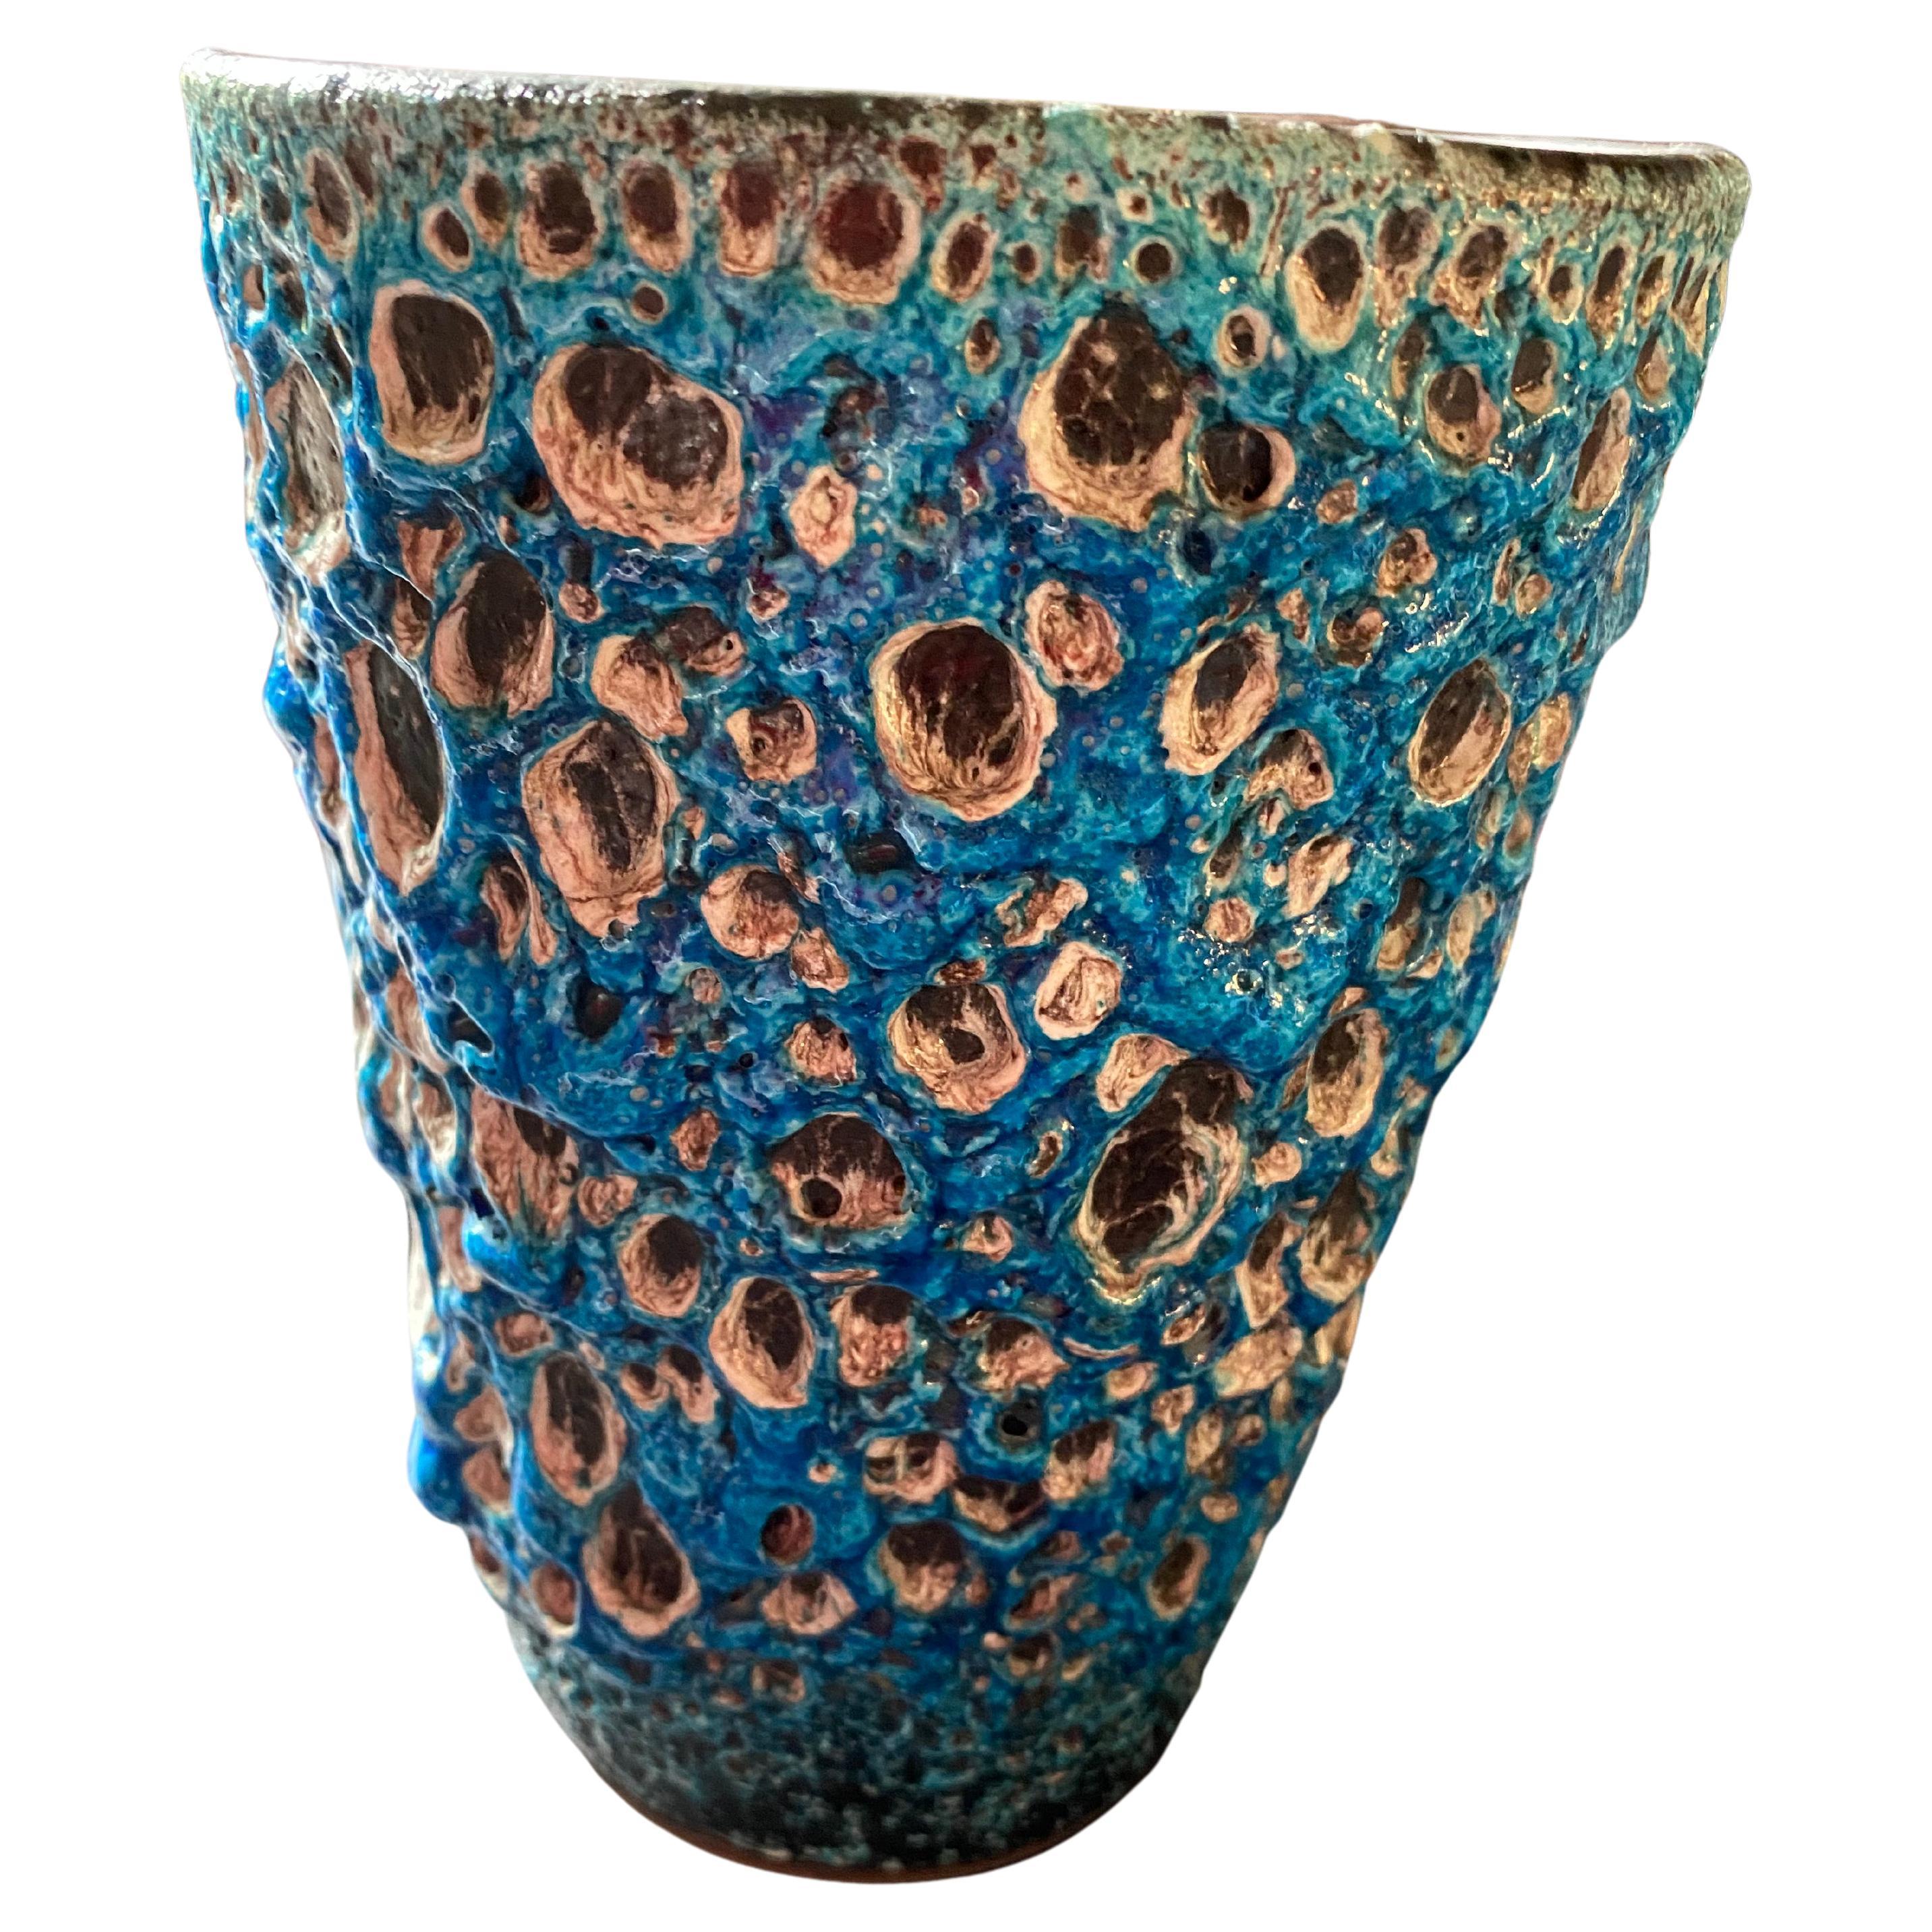 A beautiful blue glazed lava vase by the well-known artist Charles Cart. From the French Le Cyclope in Annecy, Charles Cart is designer of Emaux des Glacier.
